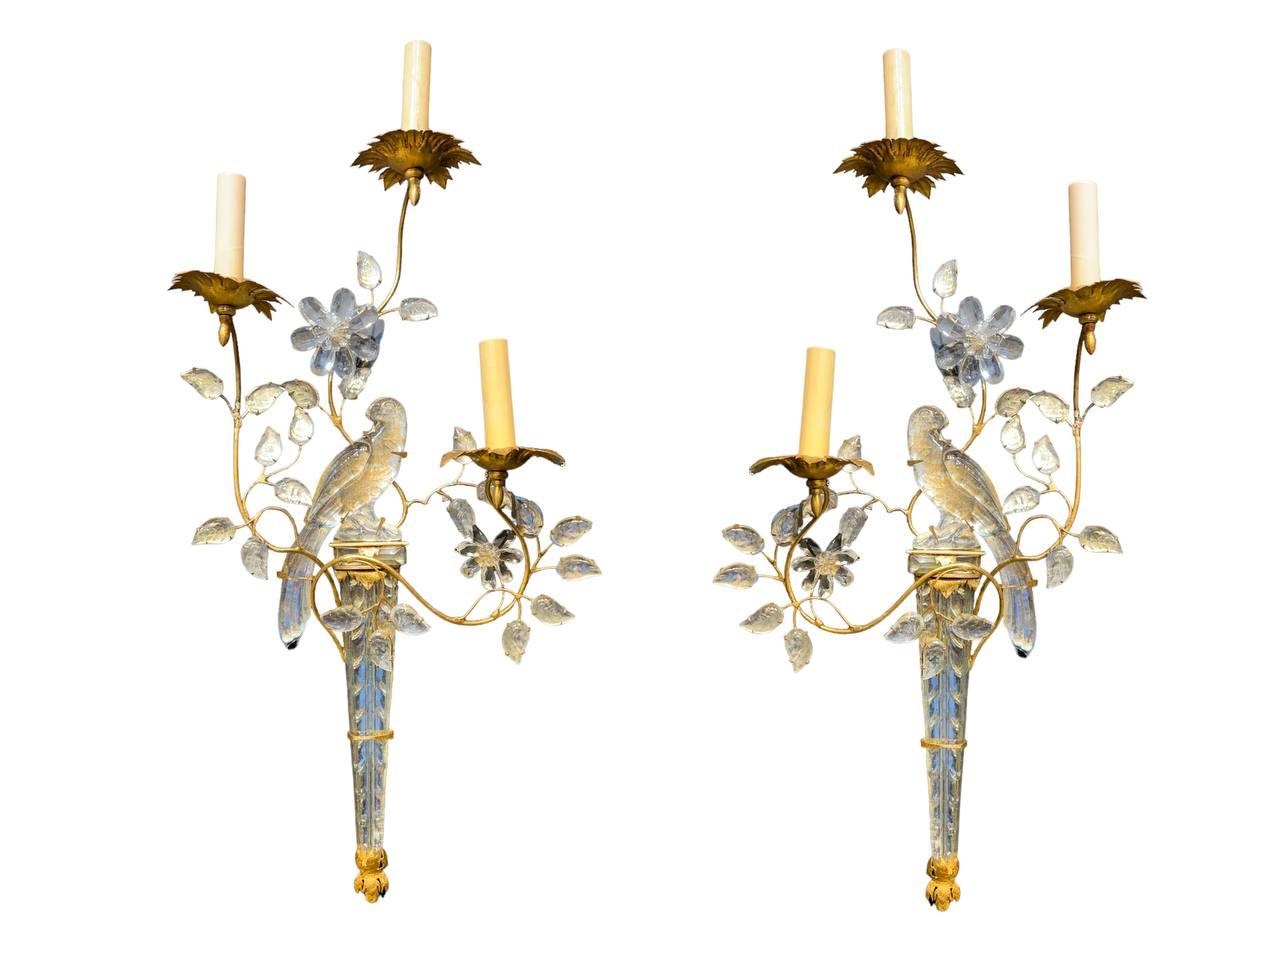 1930's French Bagues Gilt Metal 3 Lights Sconces with Crystal Birds